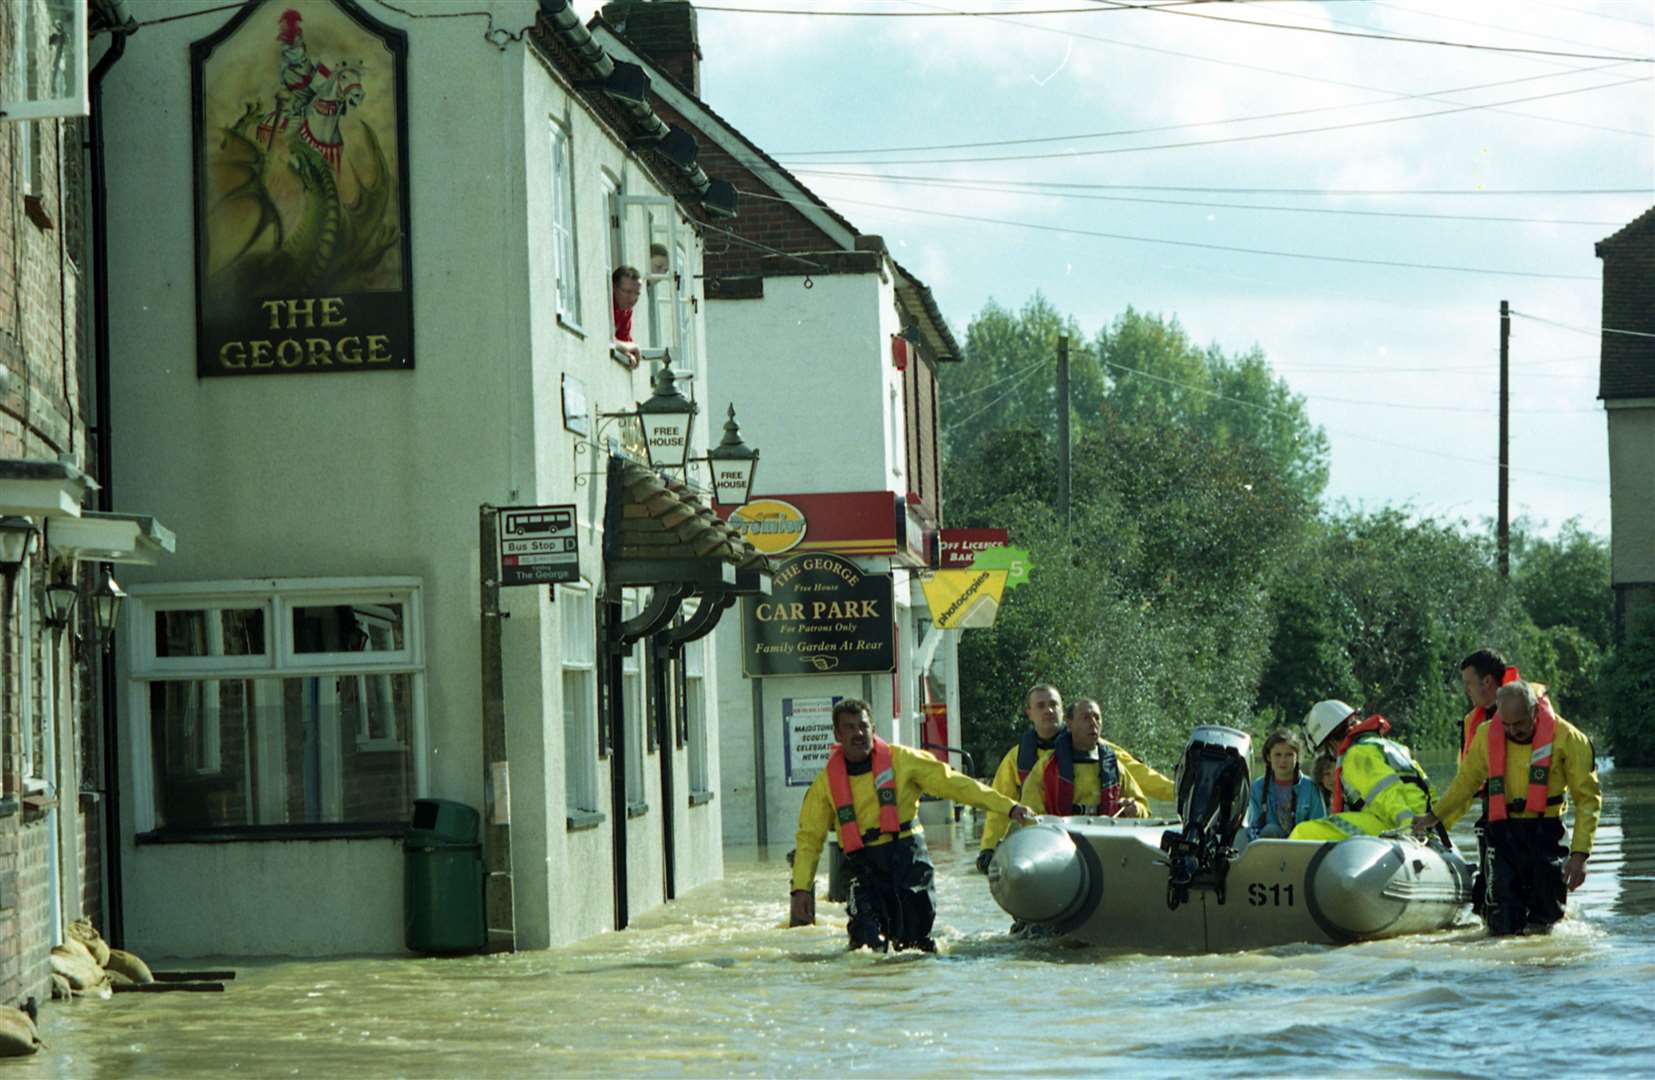 The fire service using inflatable to rescue residents from the floods in Maidstone.